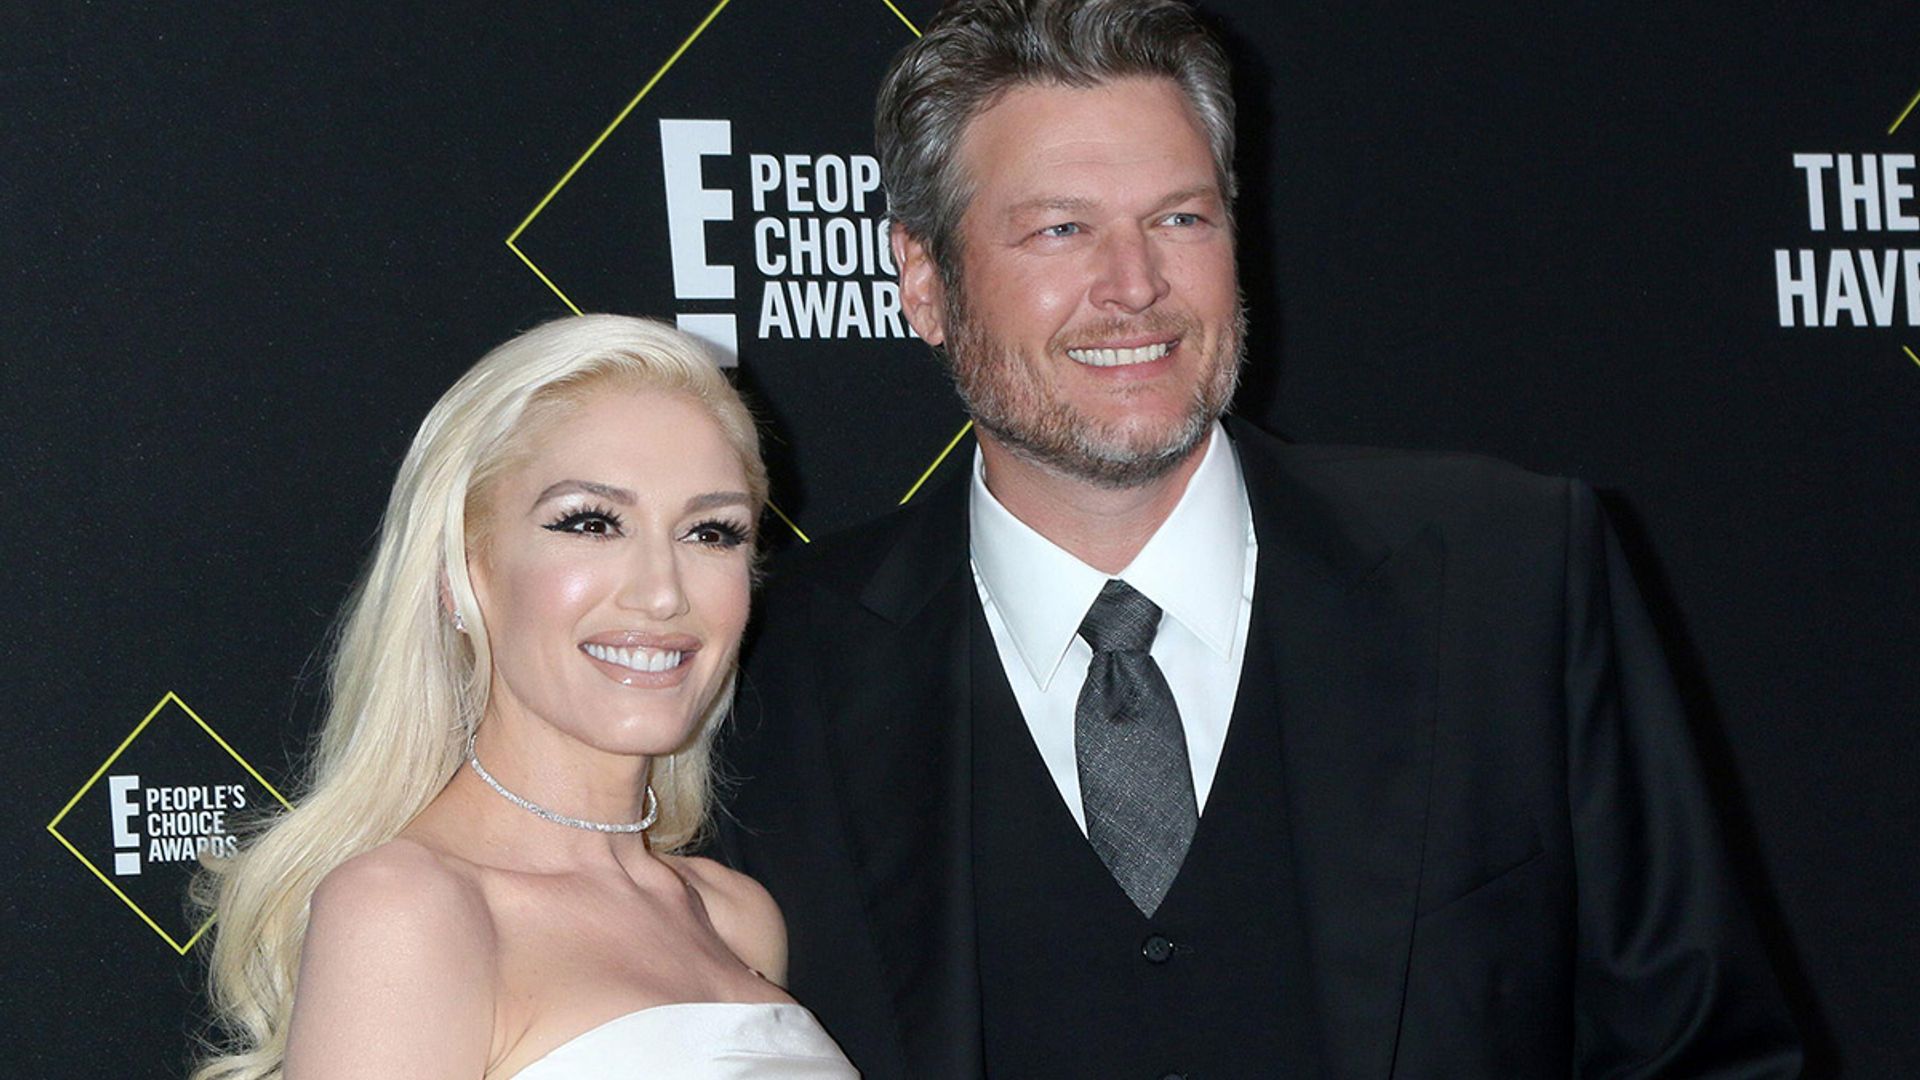 Gwen Stefani shares photo of her incredible five-tiered vintage wedding cake